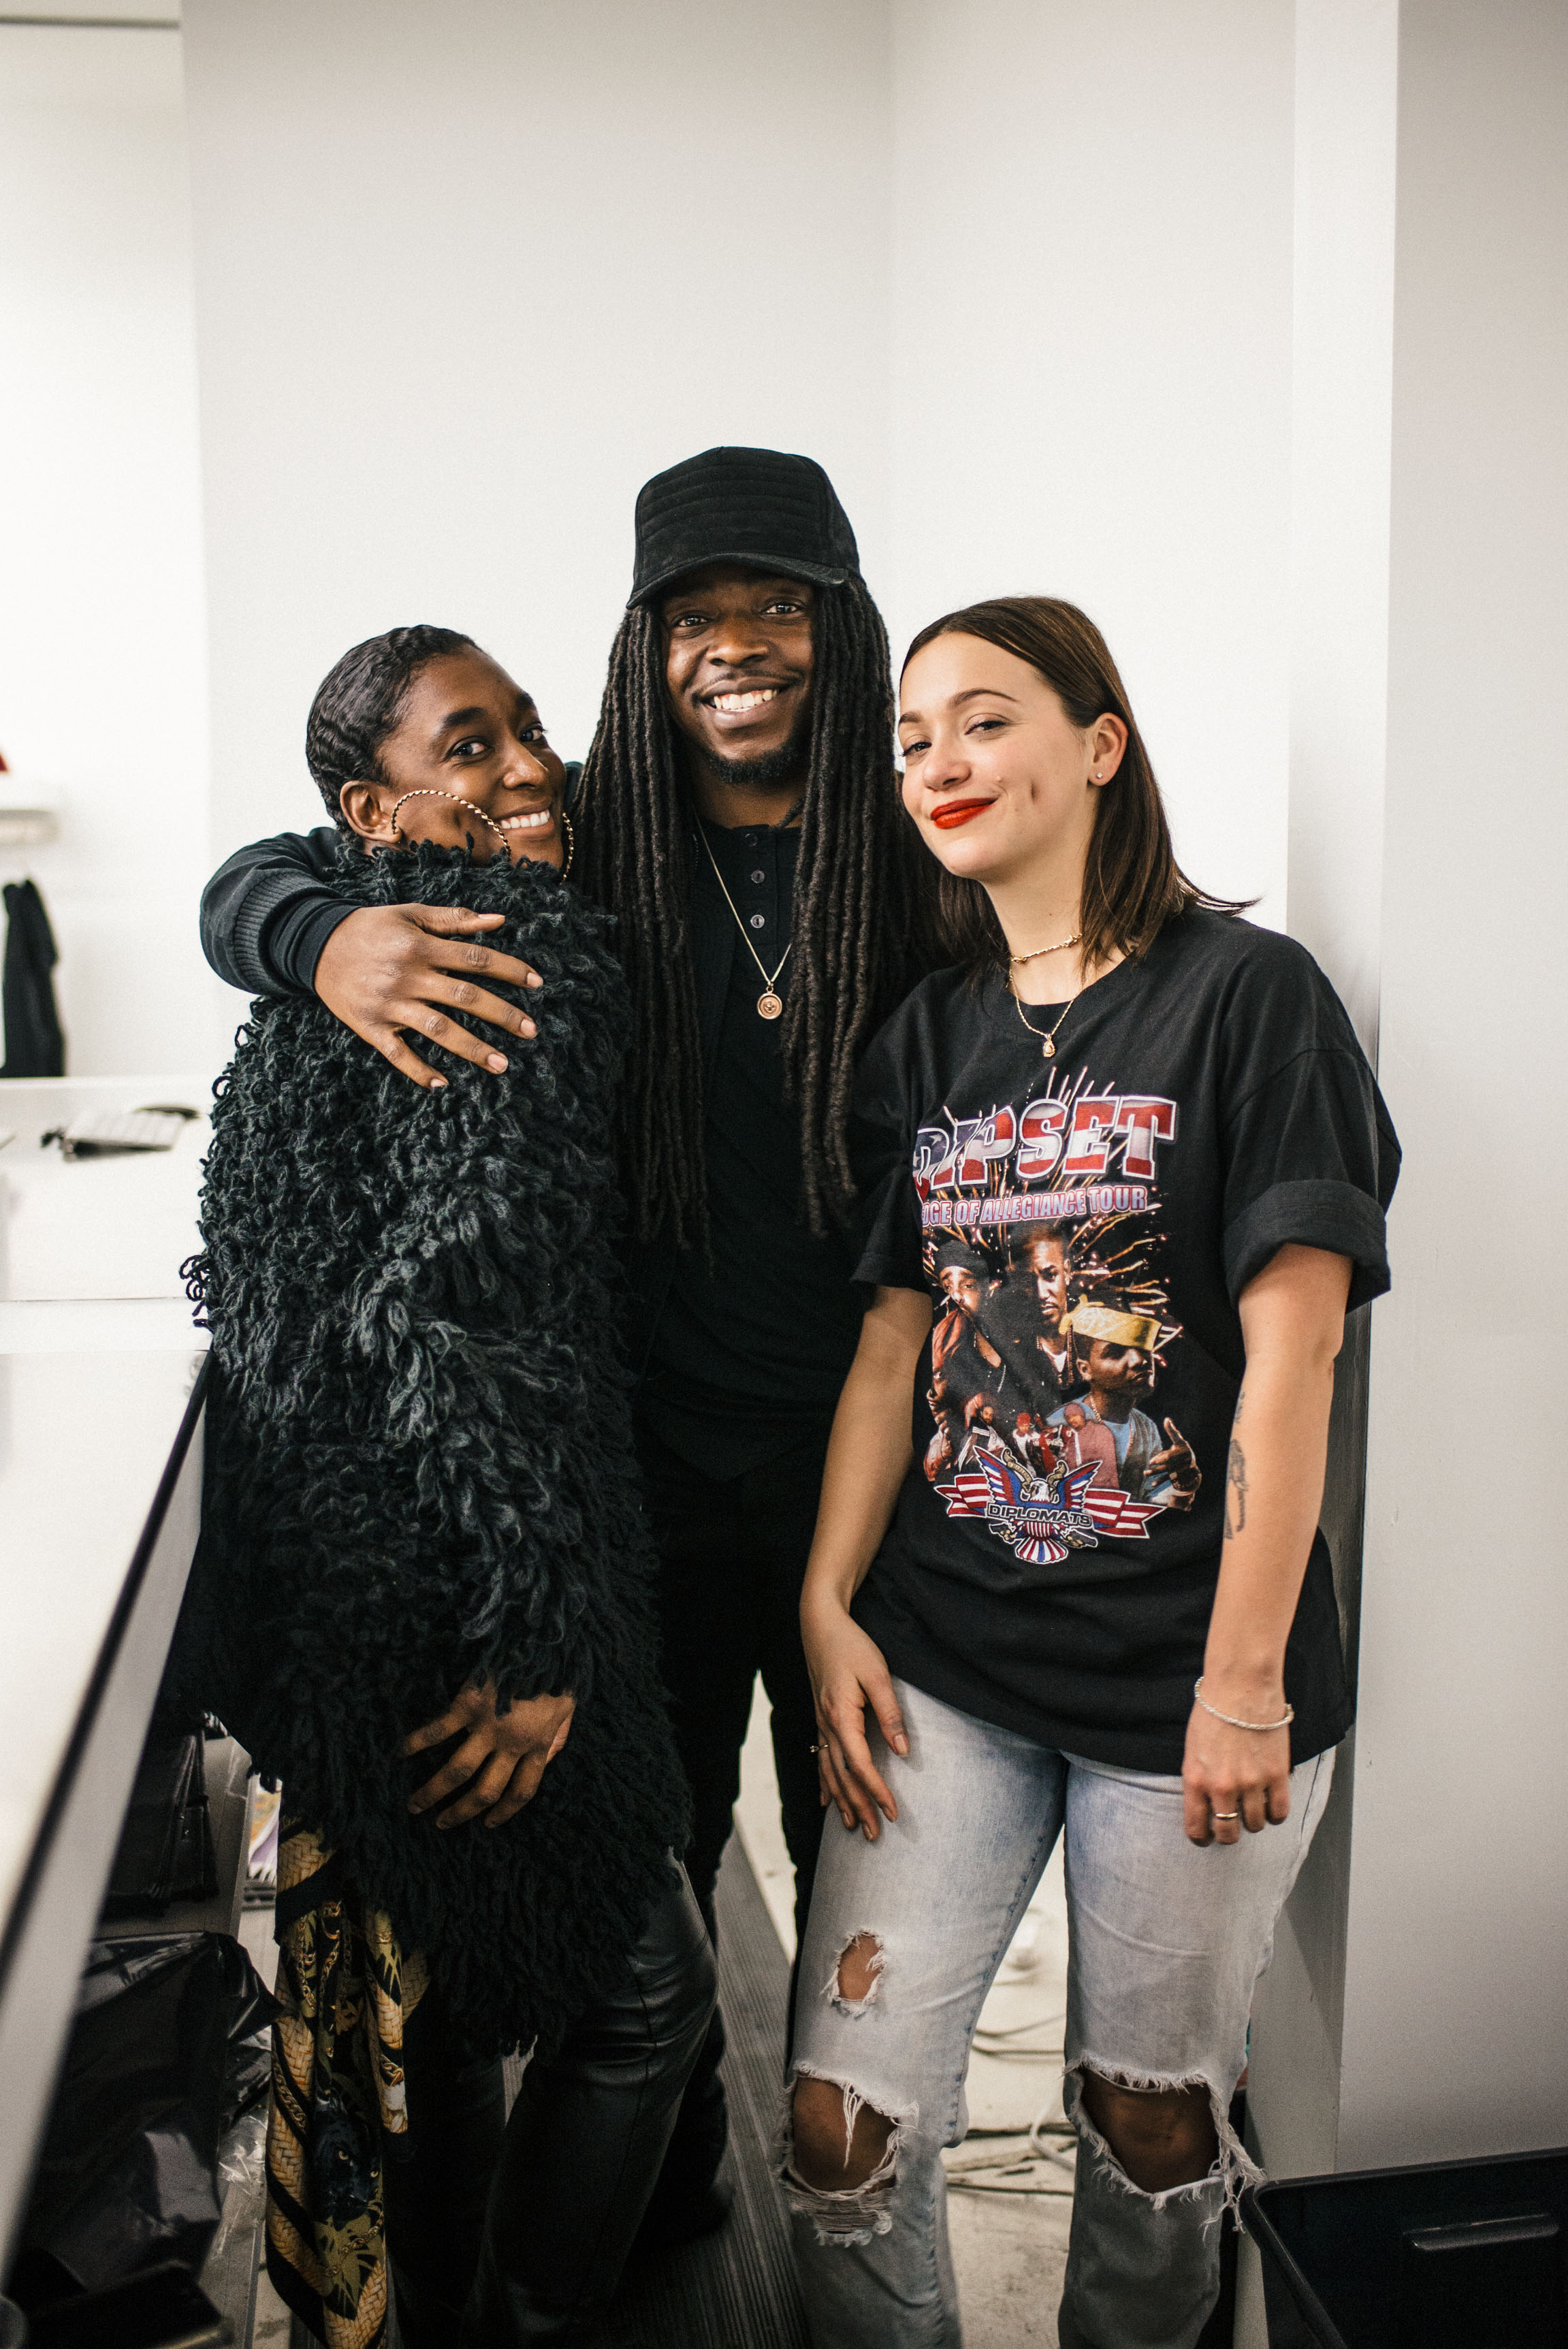  Sandalboyz Launch at Dope Fairfax (Jan 22). Pictured: Charlotte Upshaw, Dell Hopkins, and Bliss Evans.&nbsp;/ Photo: © Diane Abapo for SUSPEND Magazine. 